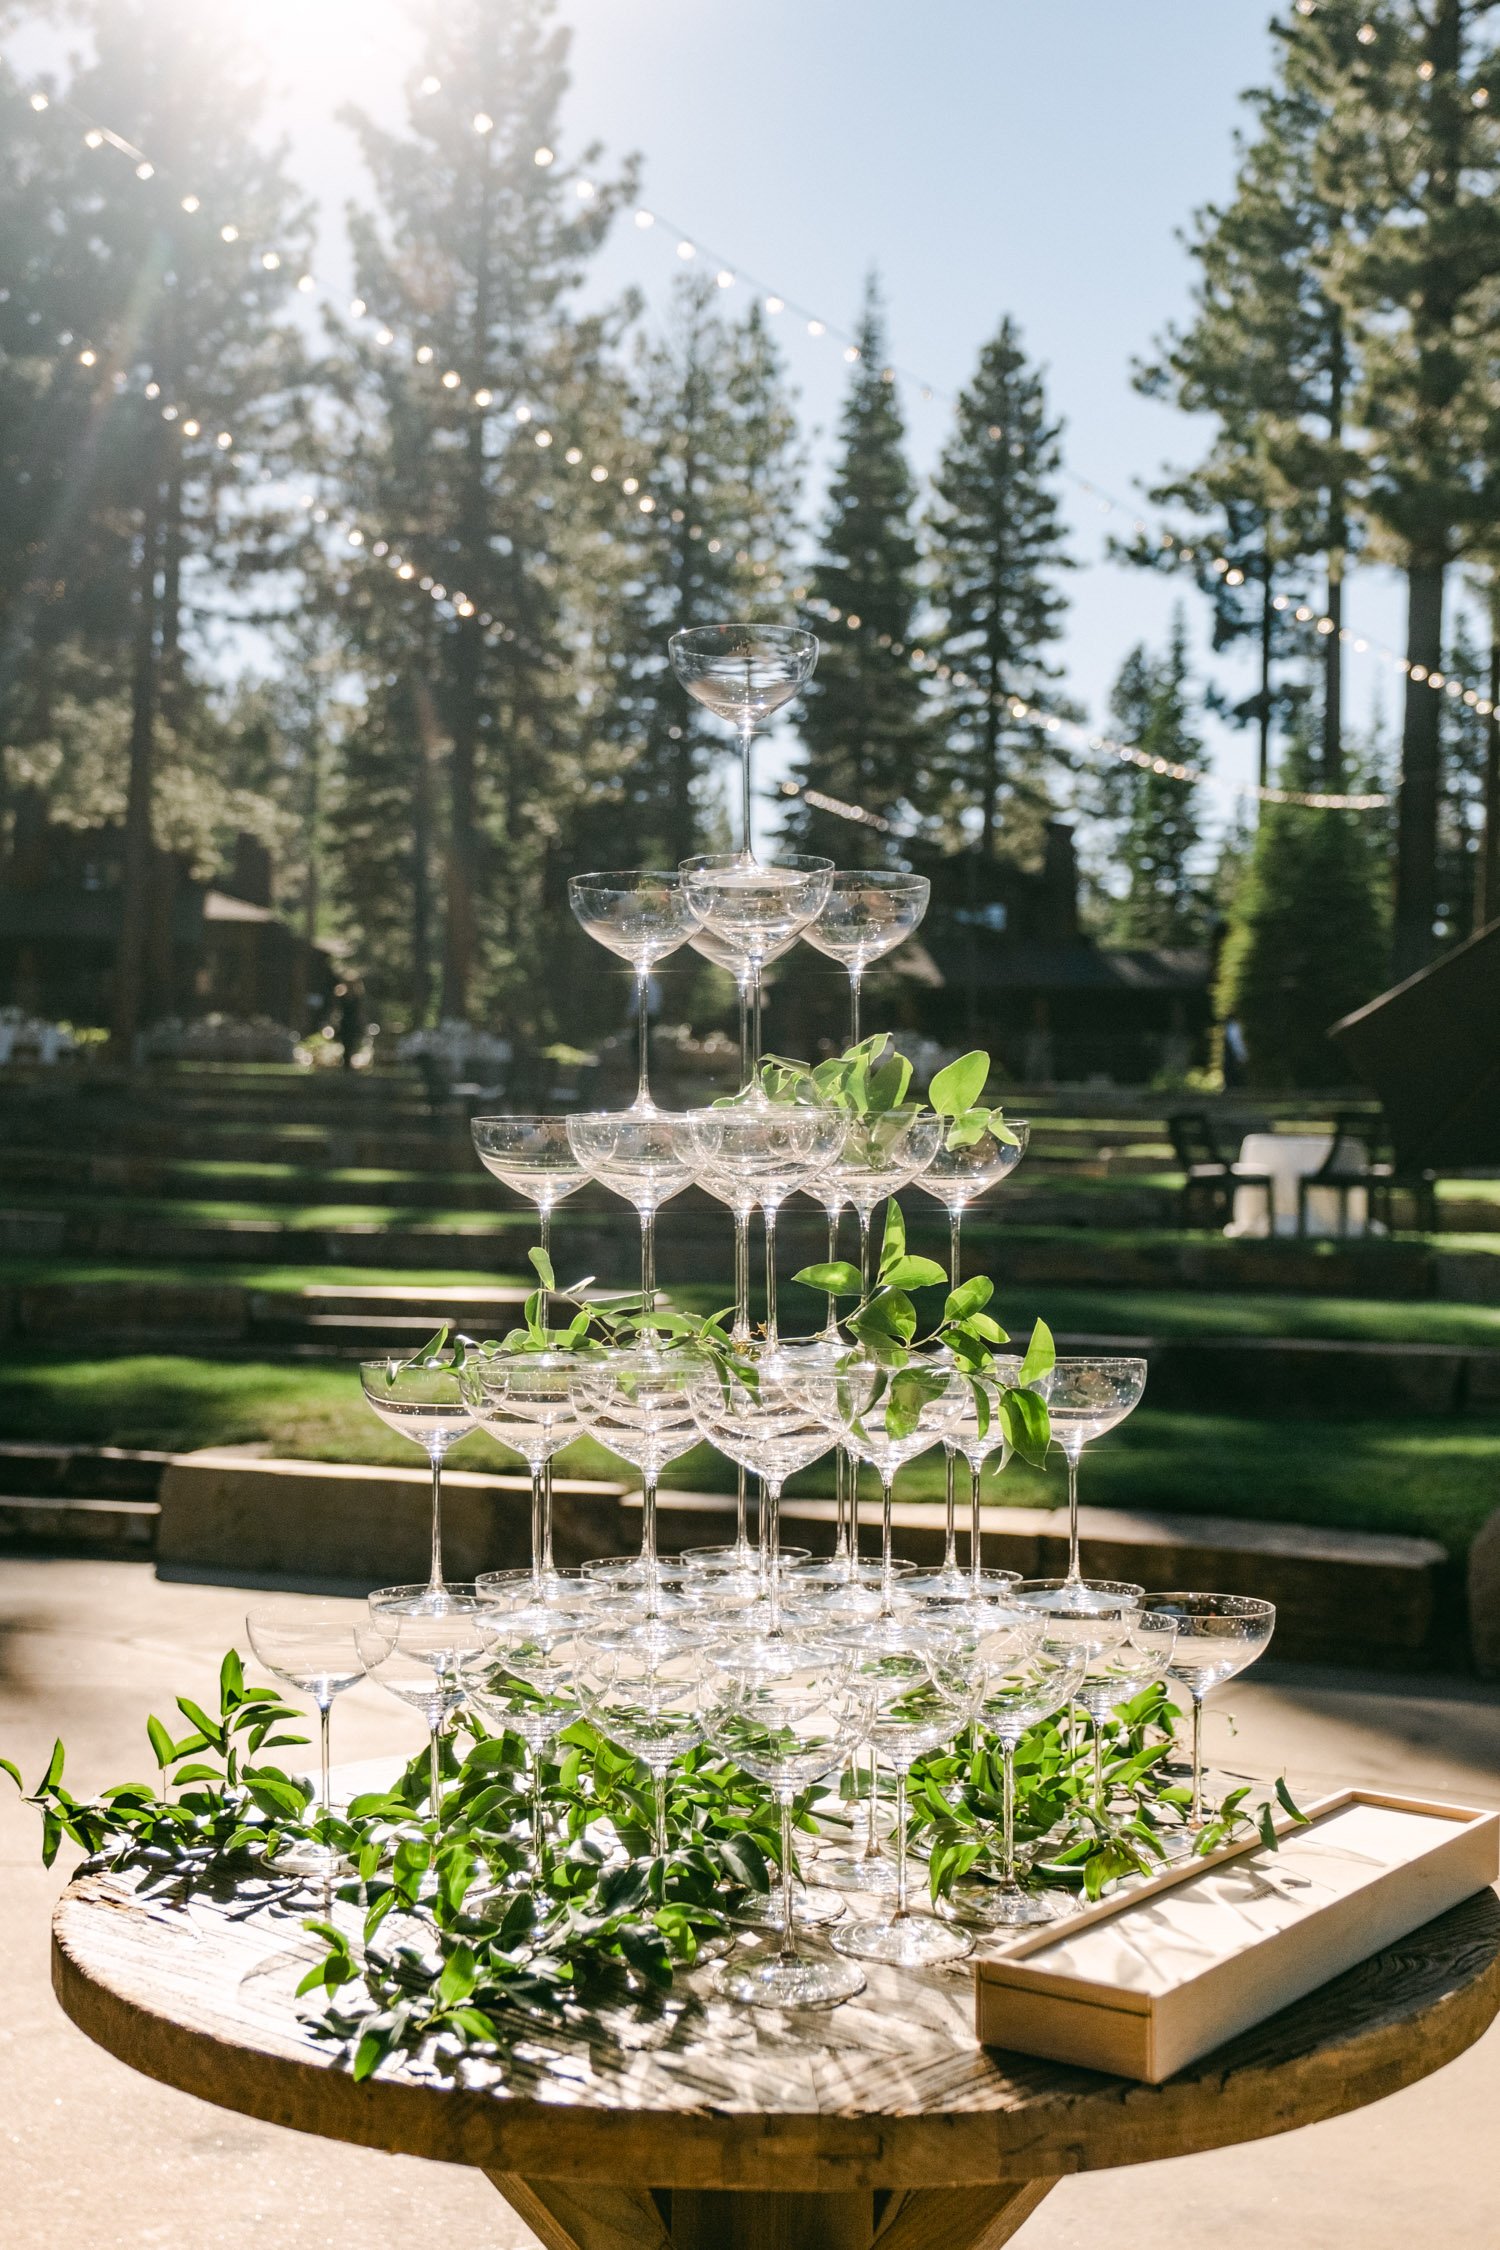 Martis Camp wedding, photo of a wedding champagne tower